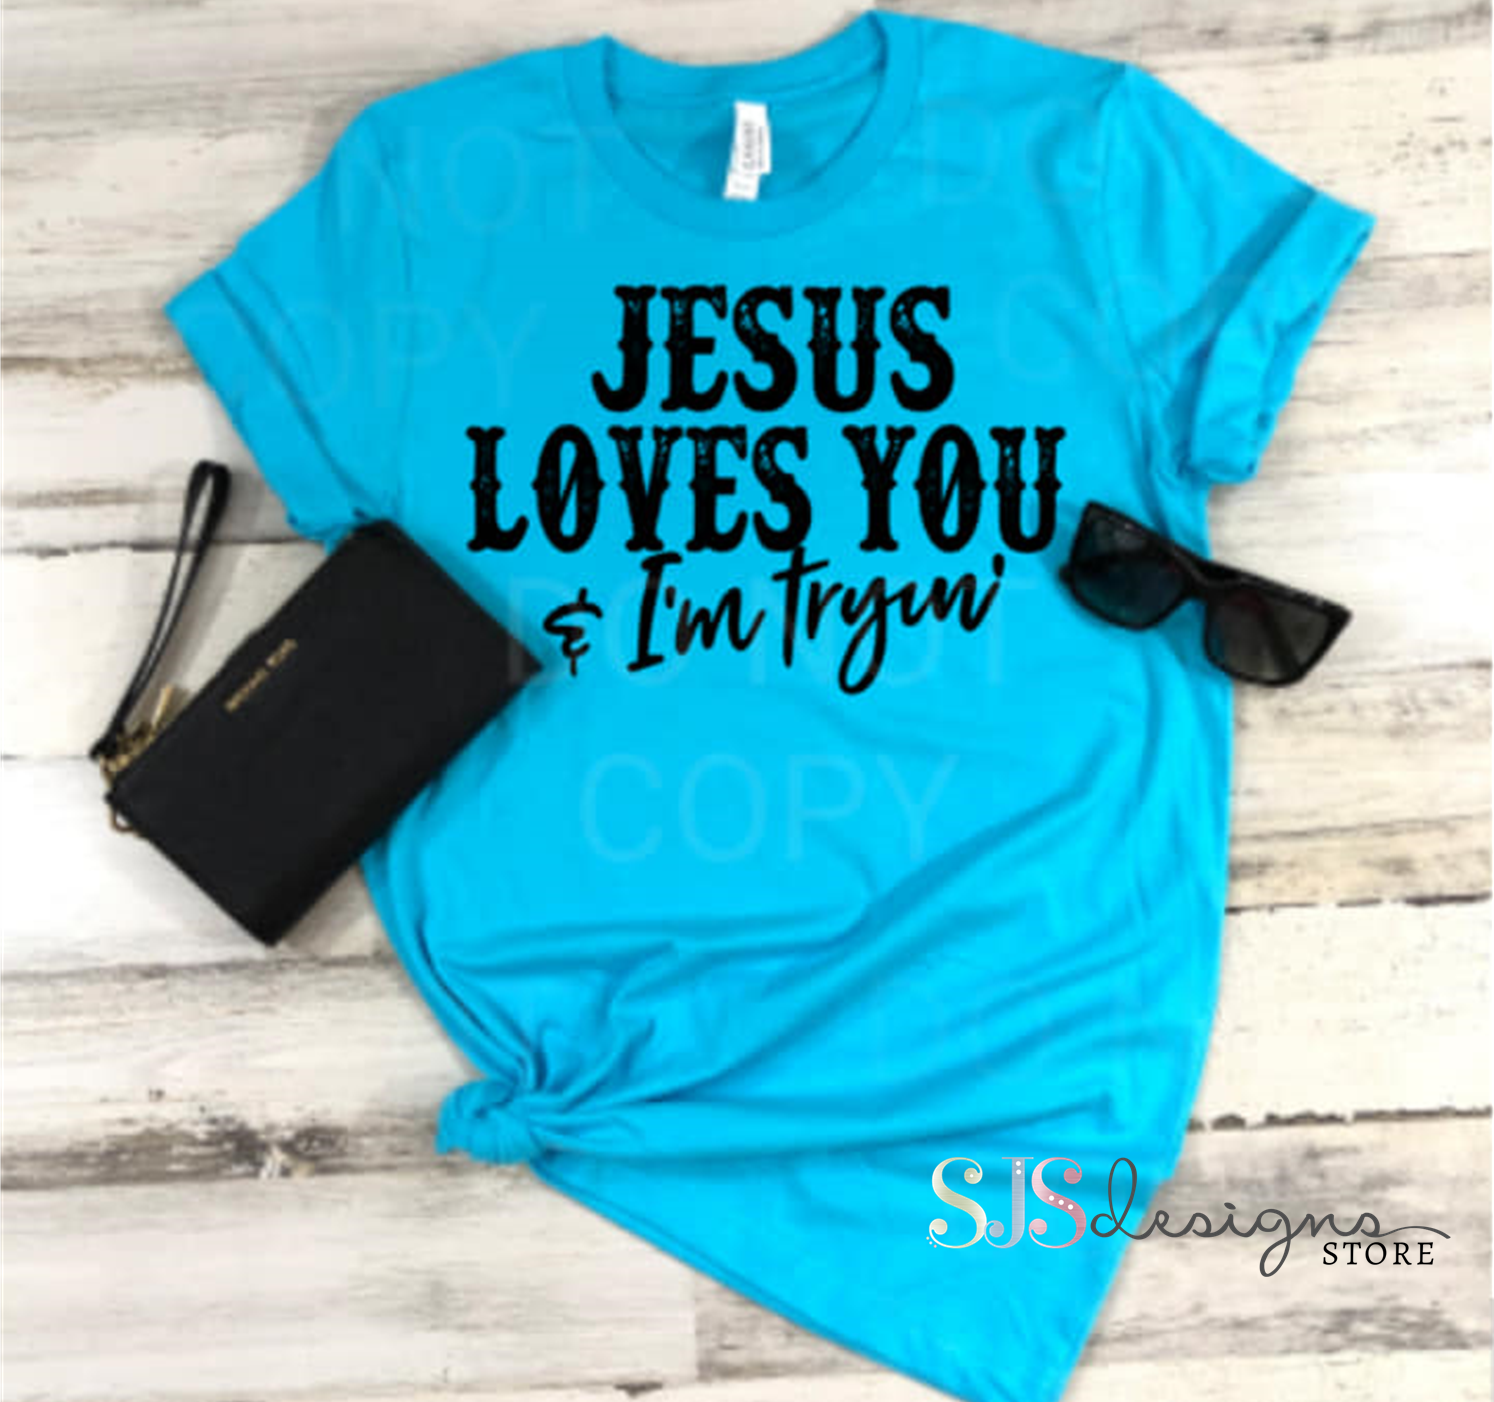 Jesus Loves You & I'm Trying Shirt